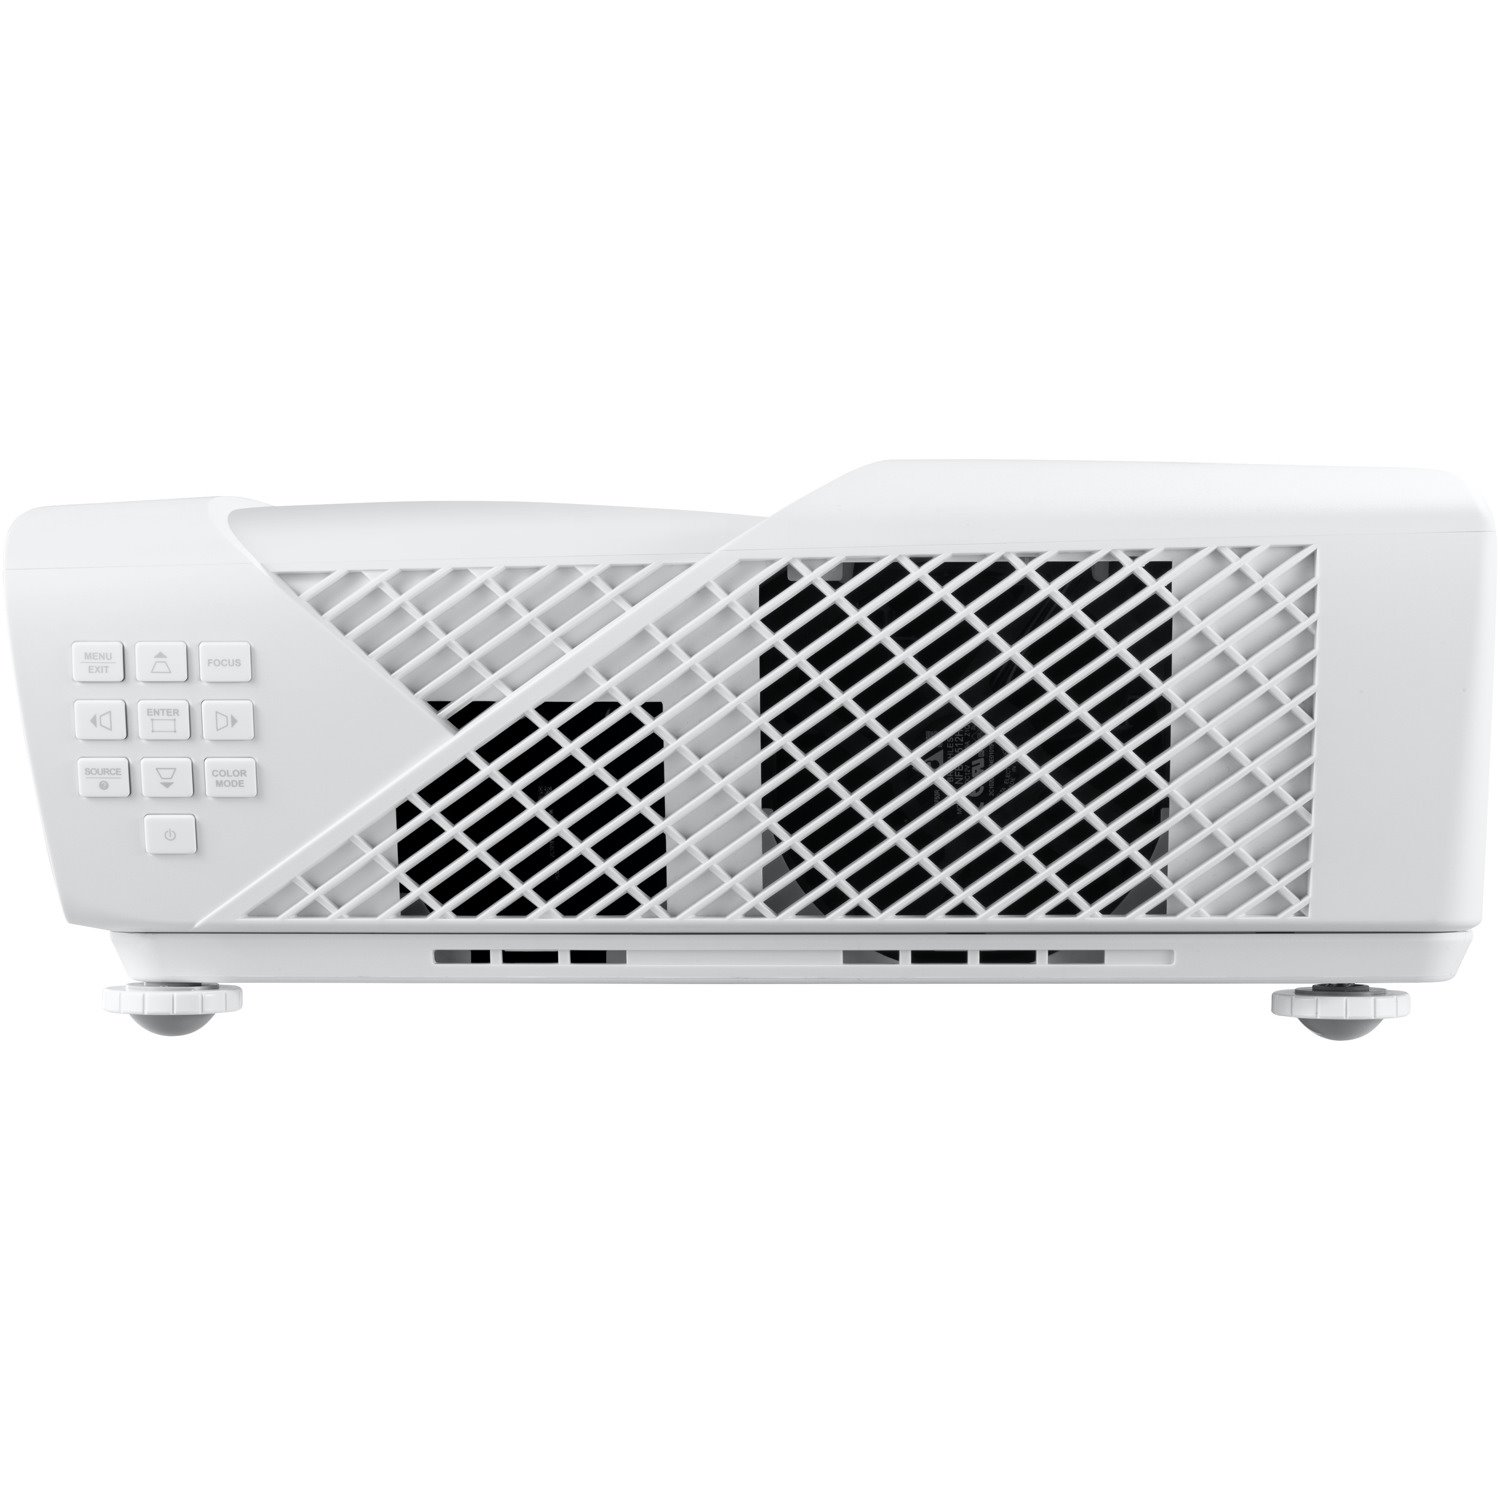 ViewSonic LS831WU 4500 Lumens WUXGA Ultra Short Throw Projector with HV Keystoning, 4 Corner Adjustment and for Business and Education Settings